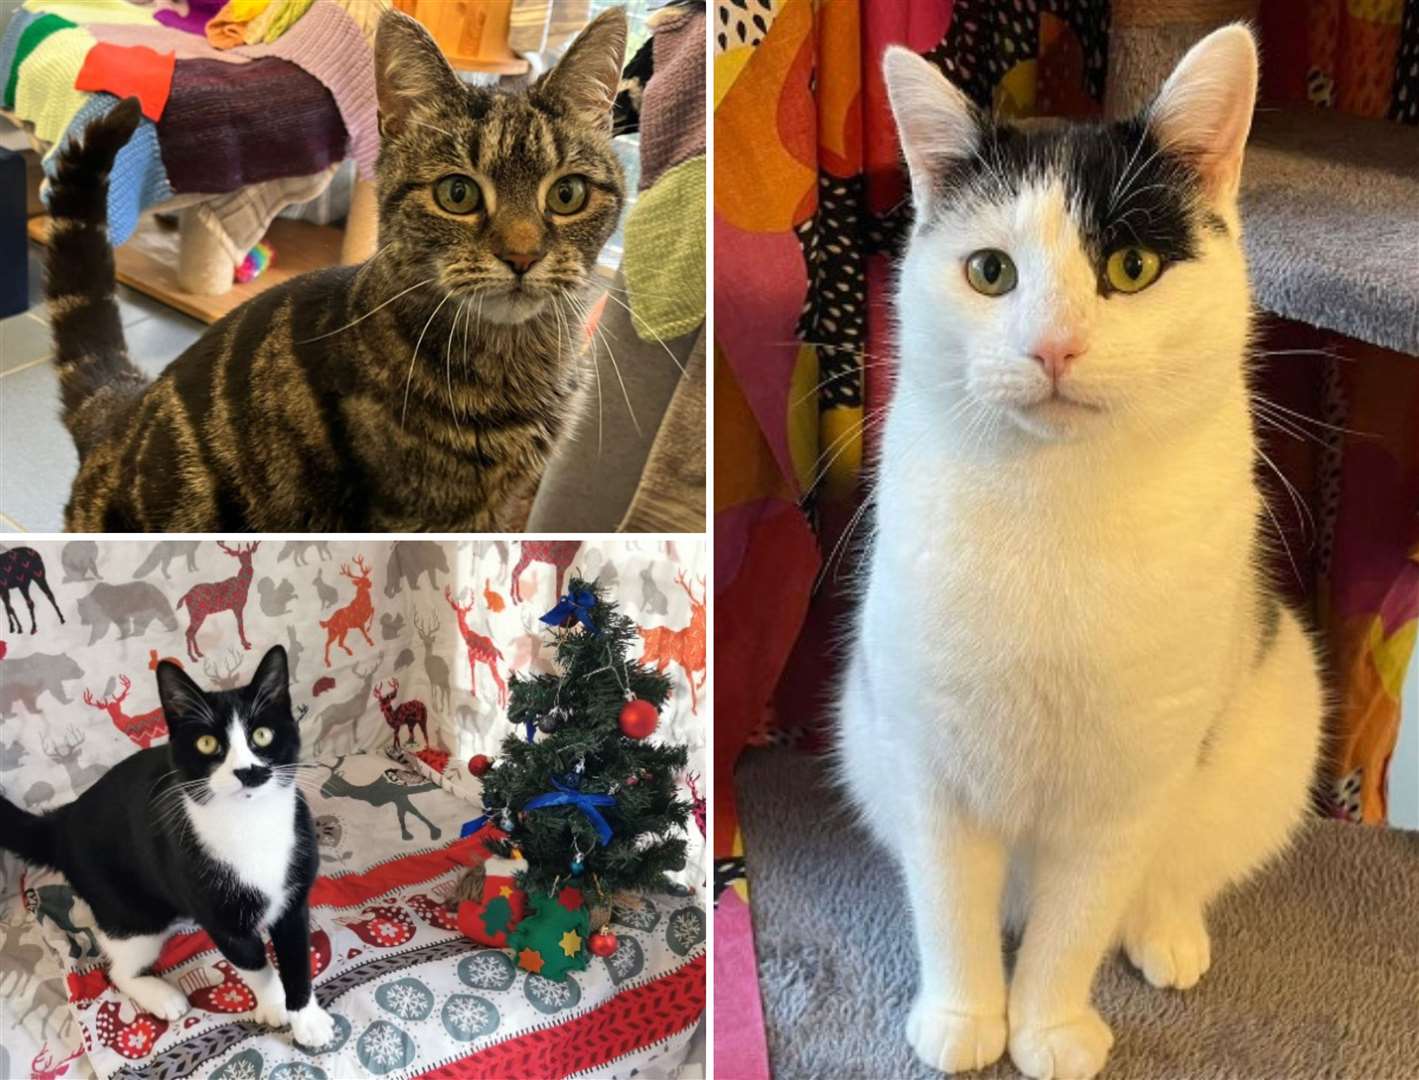 Helena (top), Smudge (bottom) and Piggy-Wiggy (right) have all found new owners before Christmas